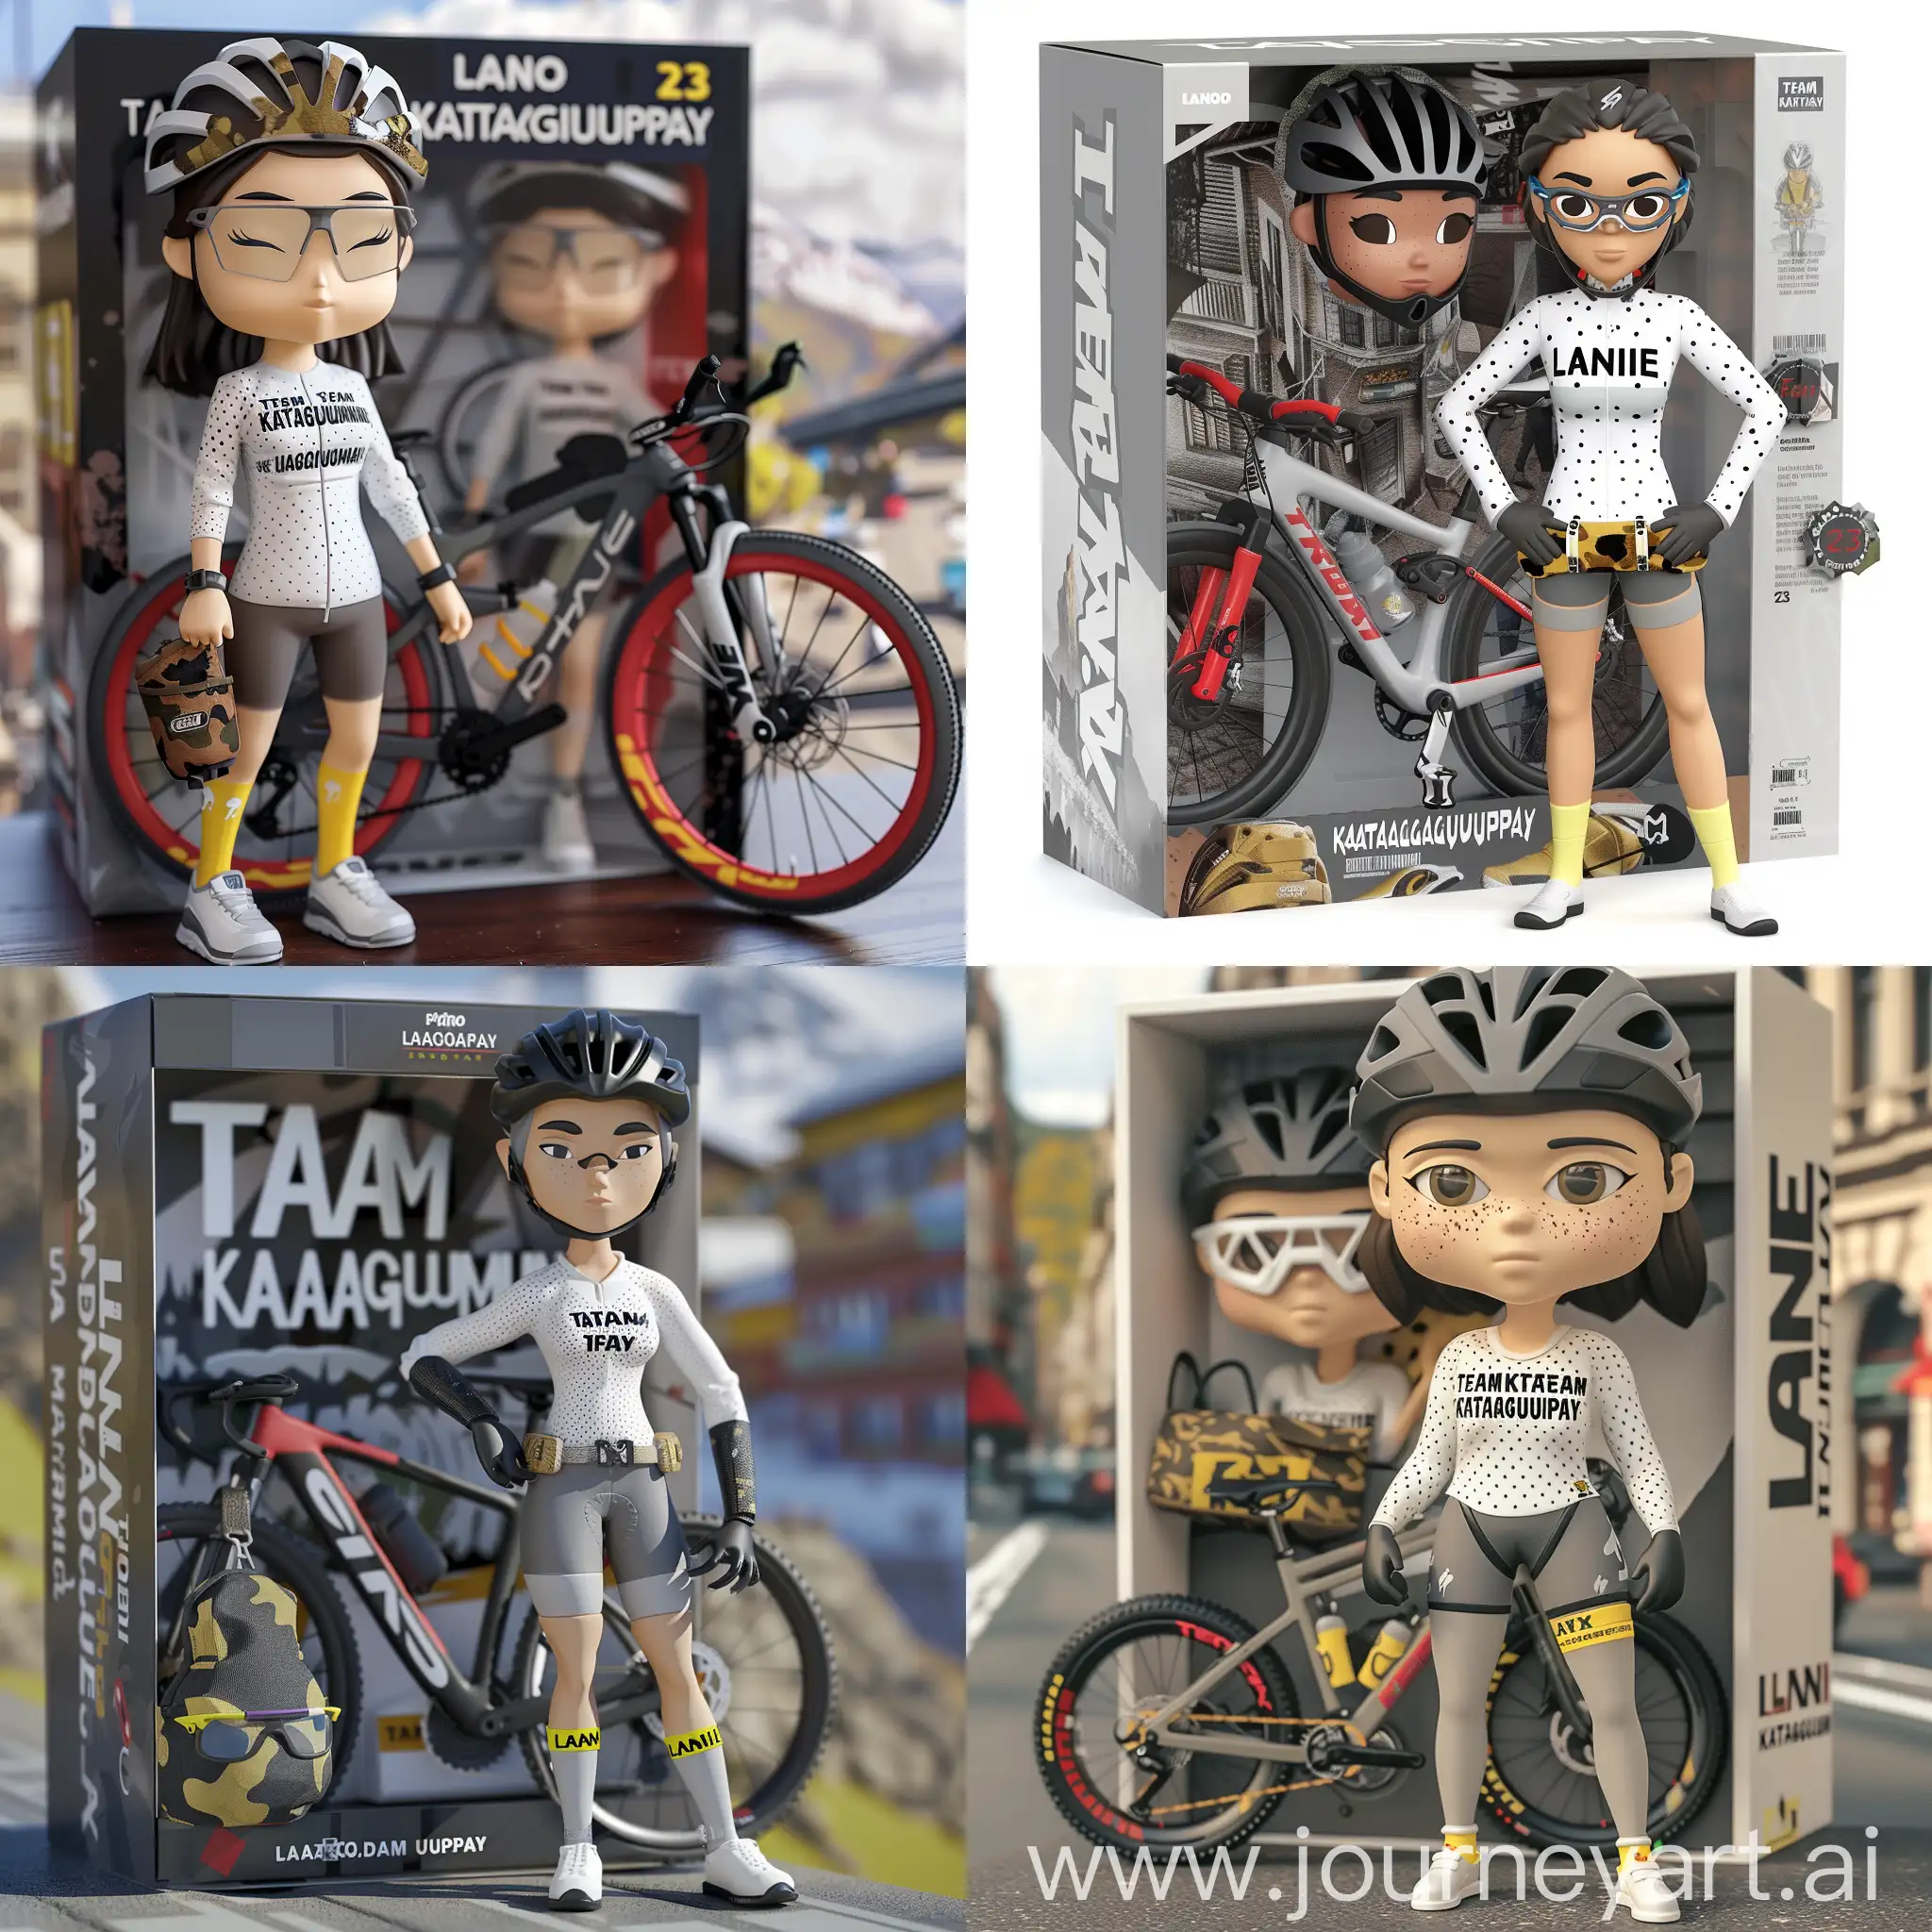 Funko figure of a a lady cyclist on a city background, female, called Lanie, The Funko is wearing  white long sleeve dotted design shirt with "TEAM KATAGUMPAY" printed, gray shorts, black gloves, black helmet, white shoes, yellow socks, camoflauge belt bag, no hair, and has a black and red hardtail mountain bike. The Funko is leaning in front of a gray and black hardtail mountain bike, holding a cycling glasses. The Funko is displayed inside a Funko box with Lanie text and Lanie logo, 23 sticker for the box, allowing visibility of the figure, typography, 3D render